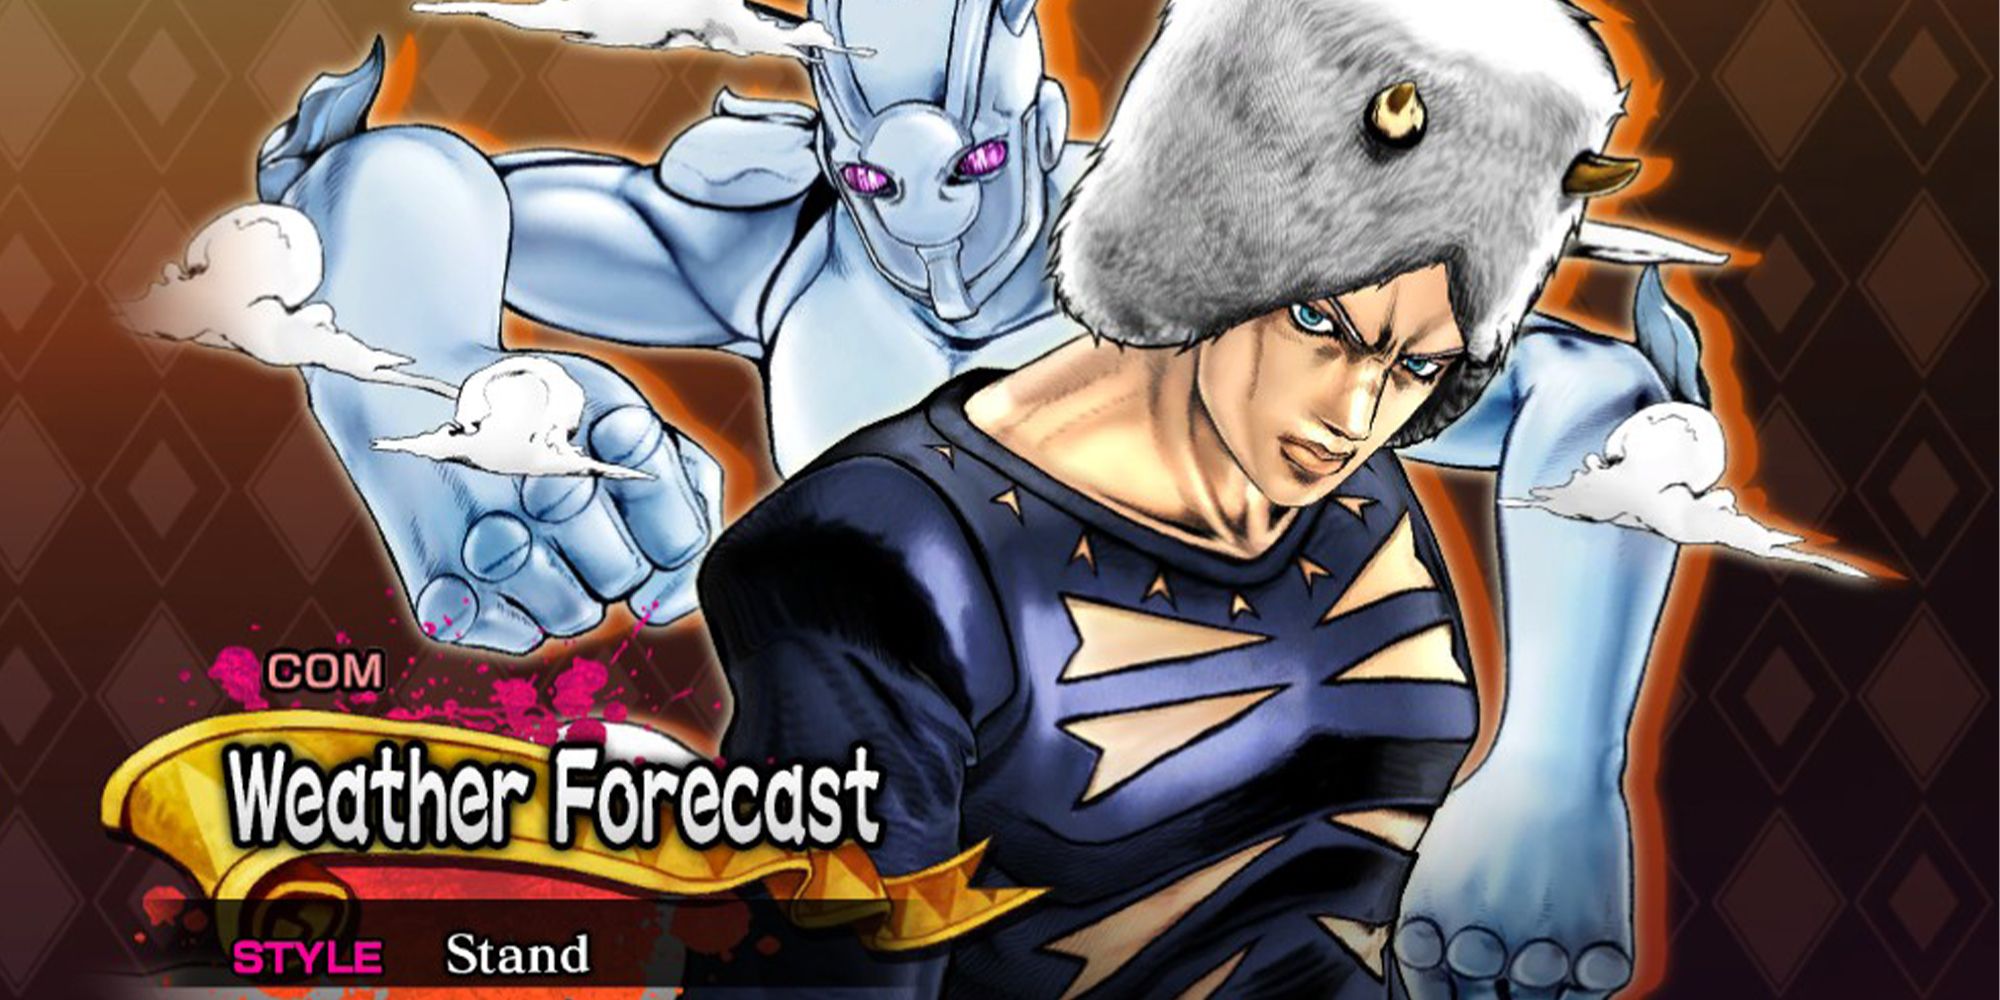 The amnesiac and his stand, Weather Forecast, from JoJo's Bizarre Adventure ASBR.